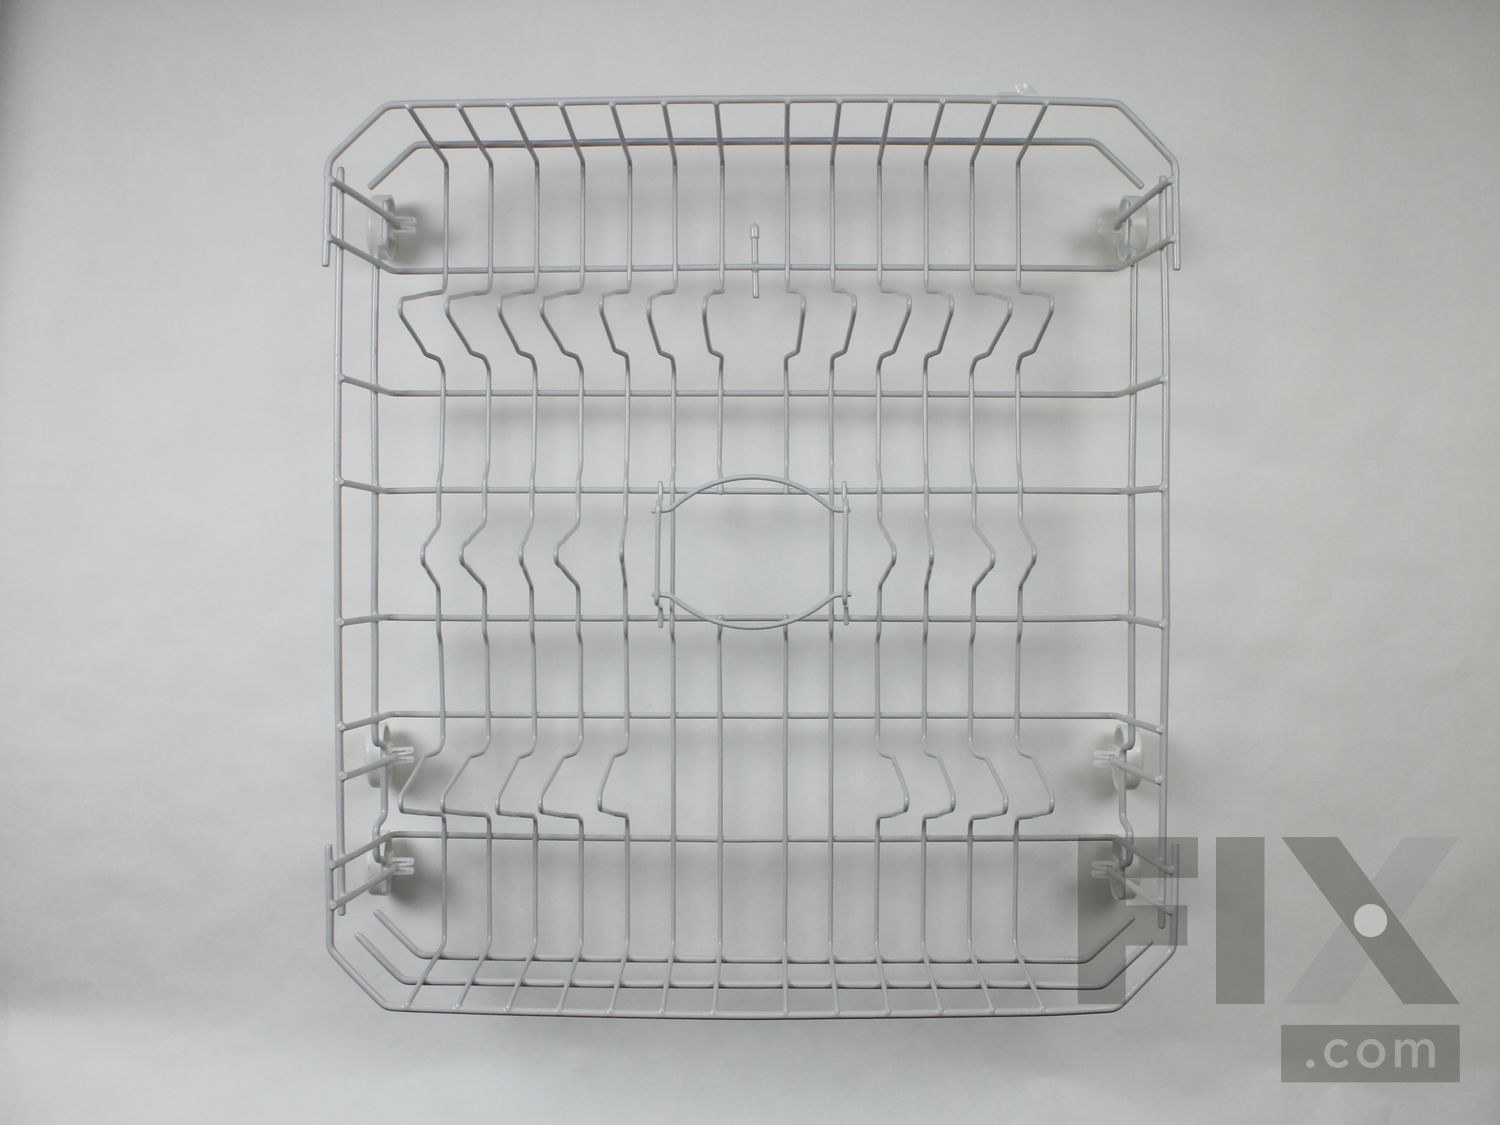 AP4980665 WD28X10284 WD28X10335 Dishwasher Lower Rack for General Electric 